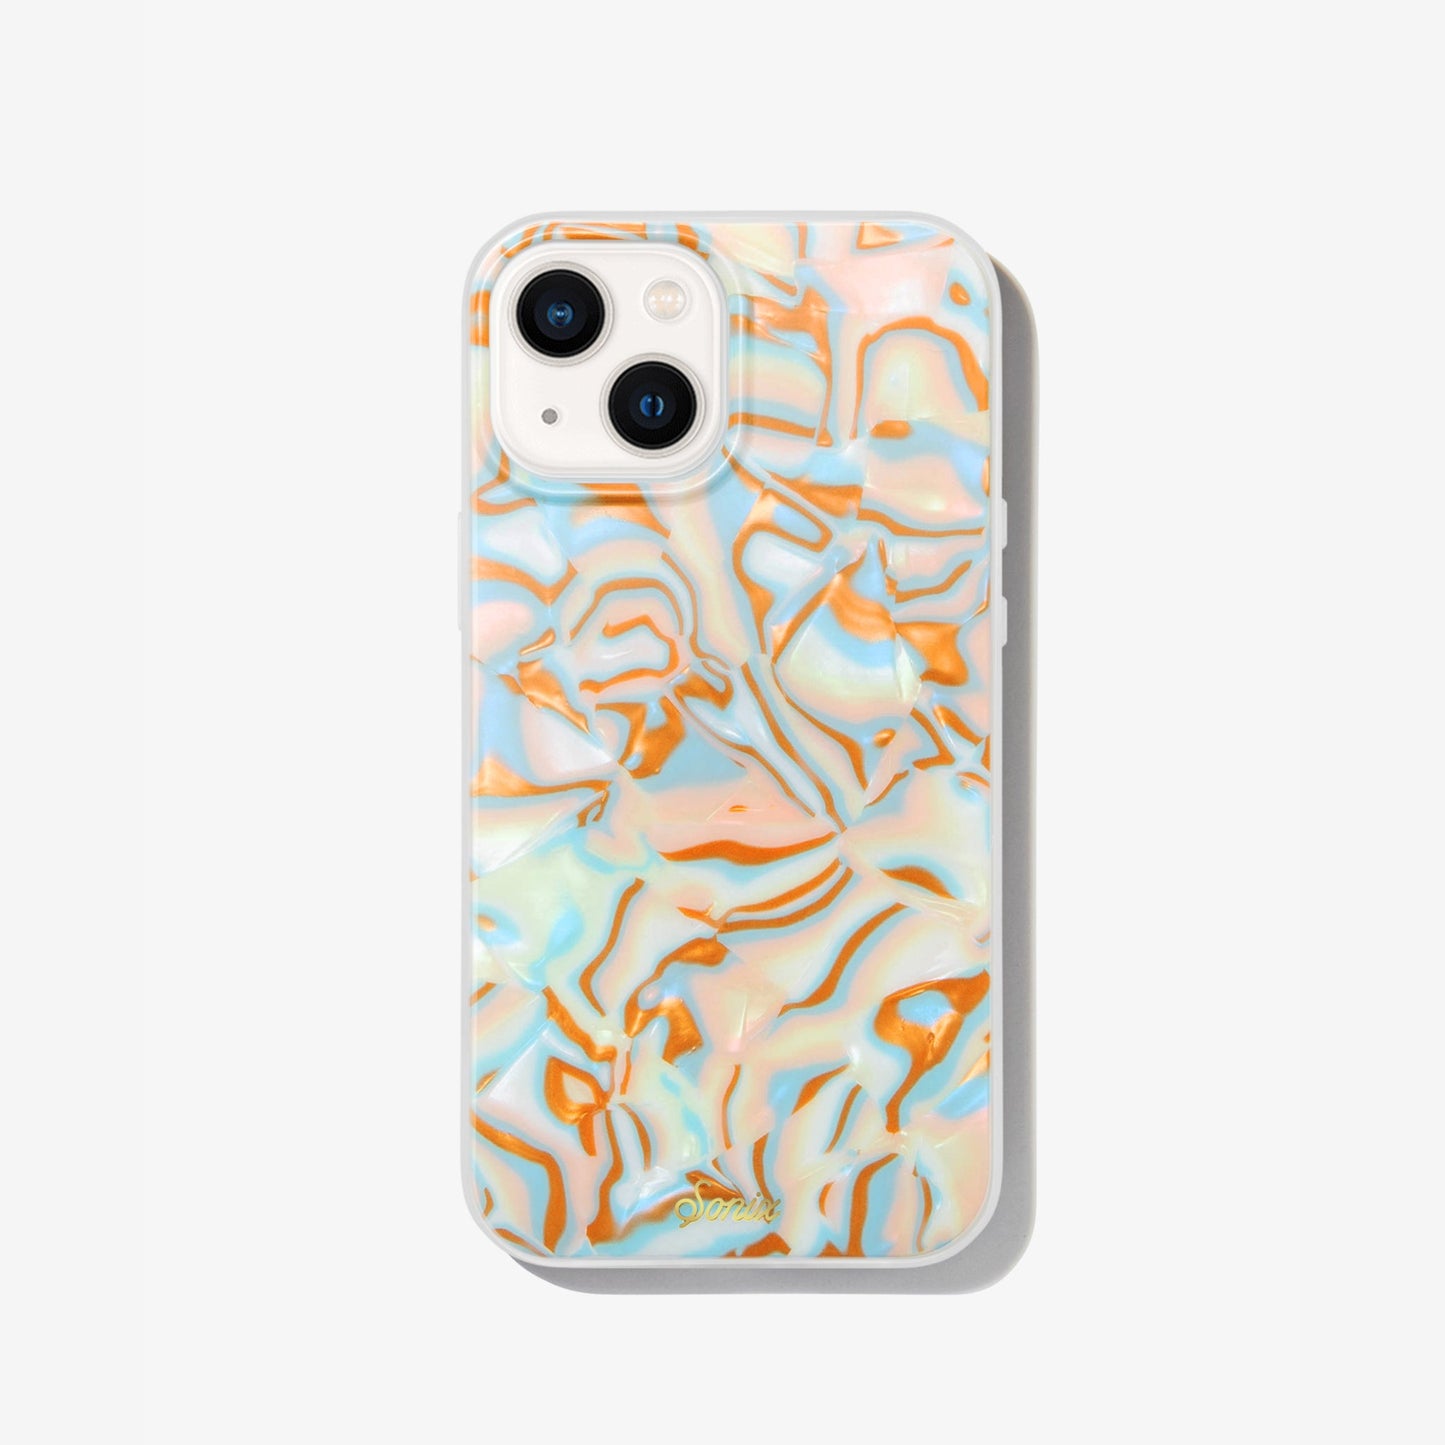 metallic oranges, blues, and cream colors in a wavy 70's pattern shown on an iphone 13